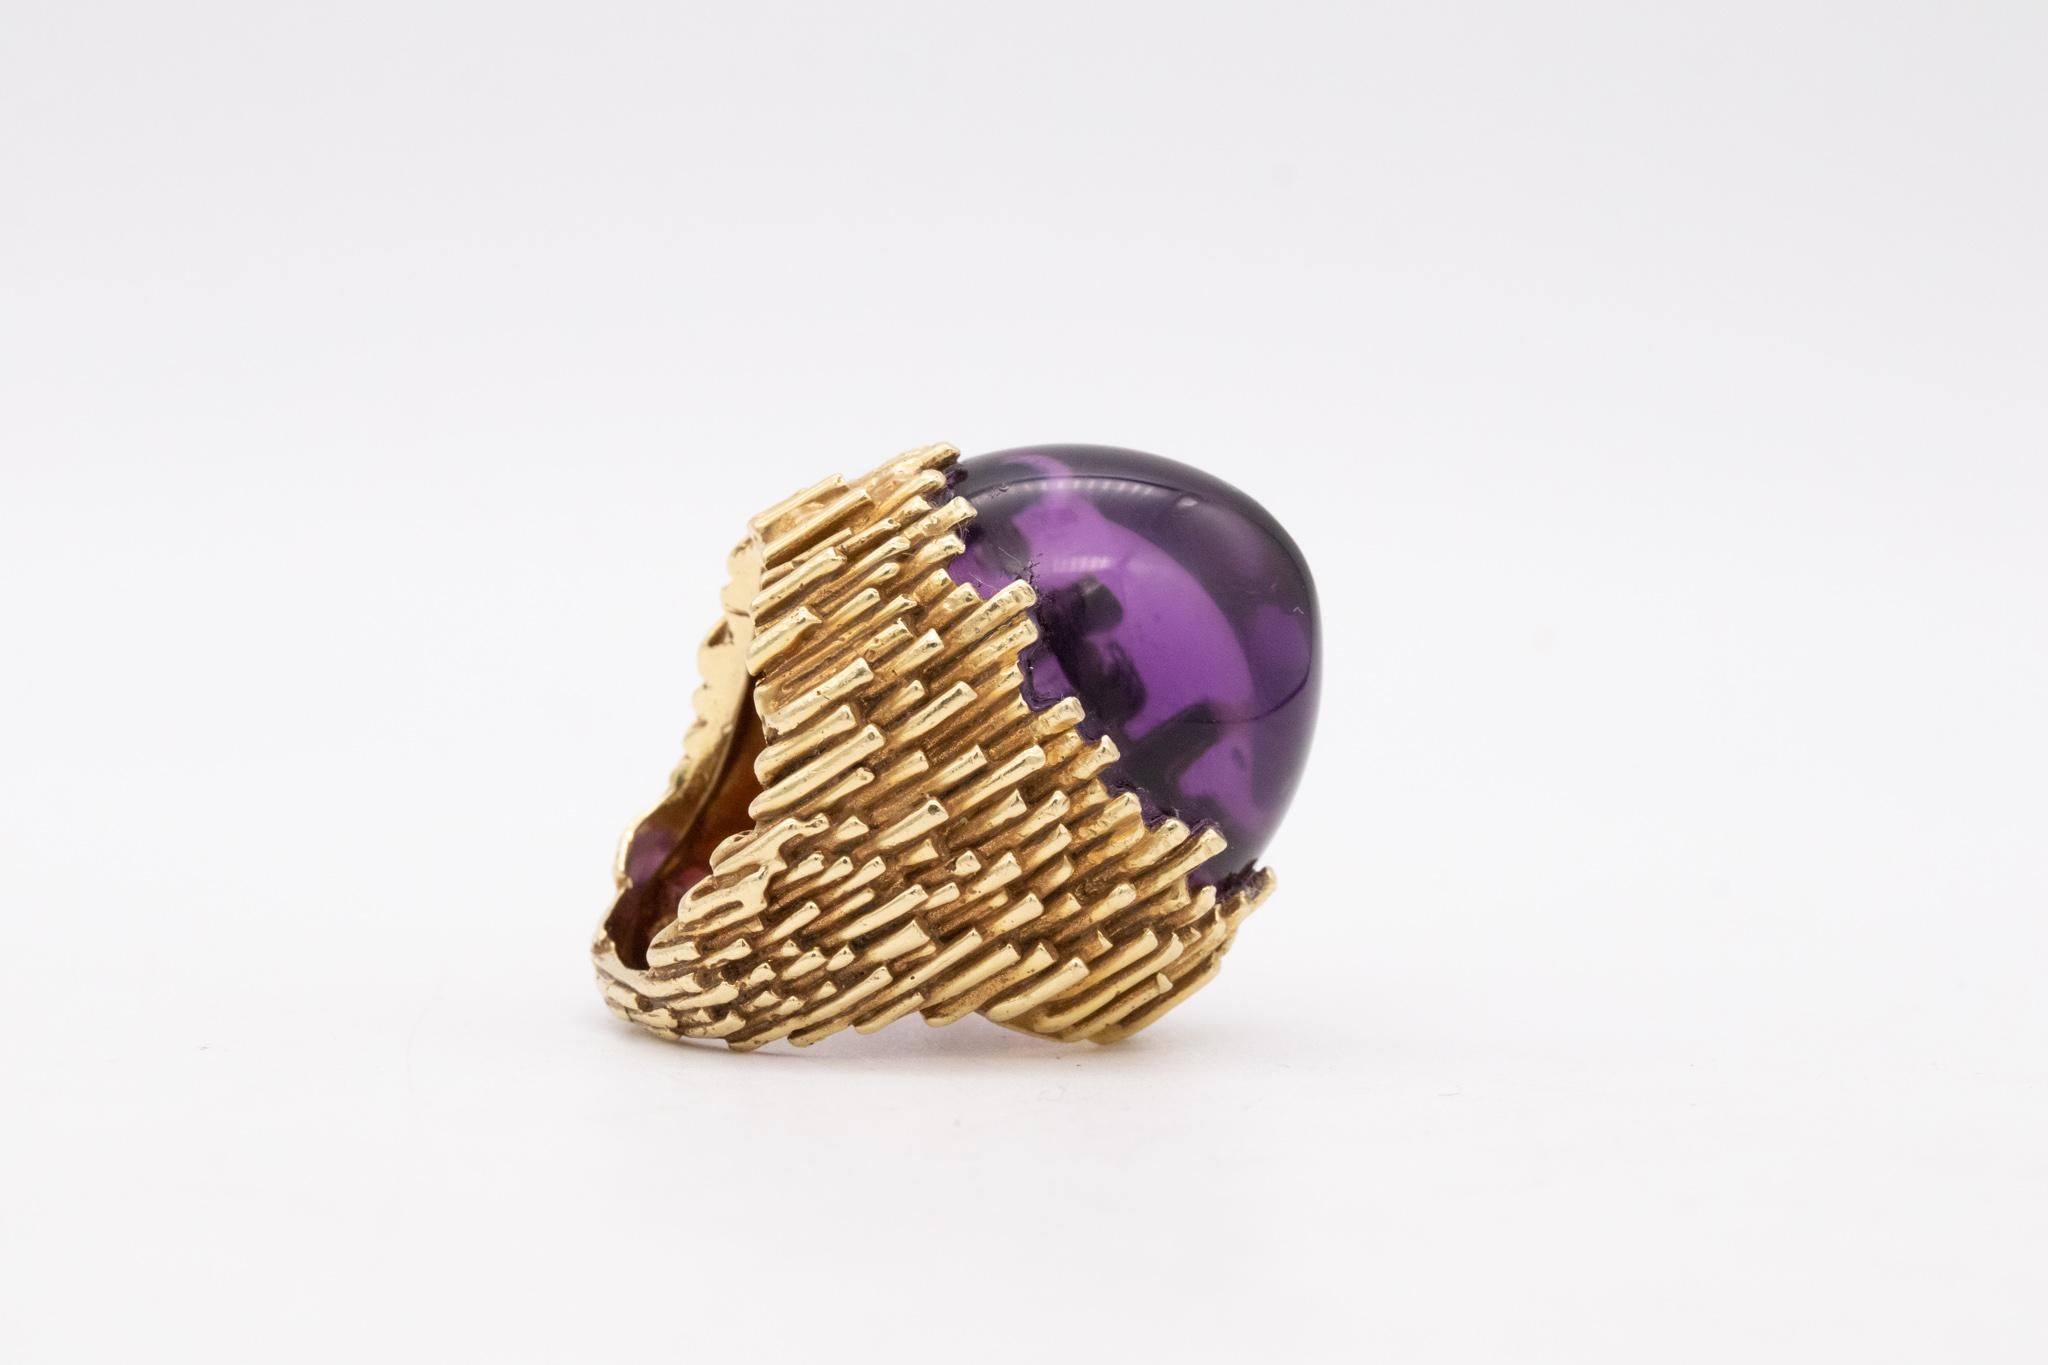 Cabochon Erwin Pearl 1960 New York Massive Cocktail Ring In 18Kt Gold 45.28 Cts Amethyst